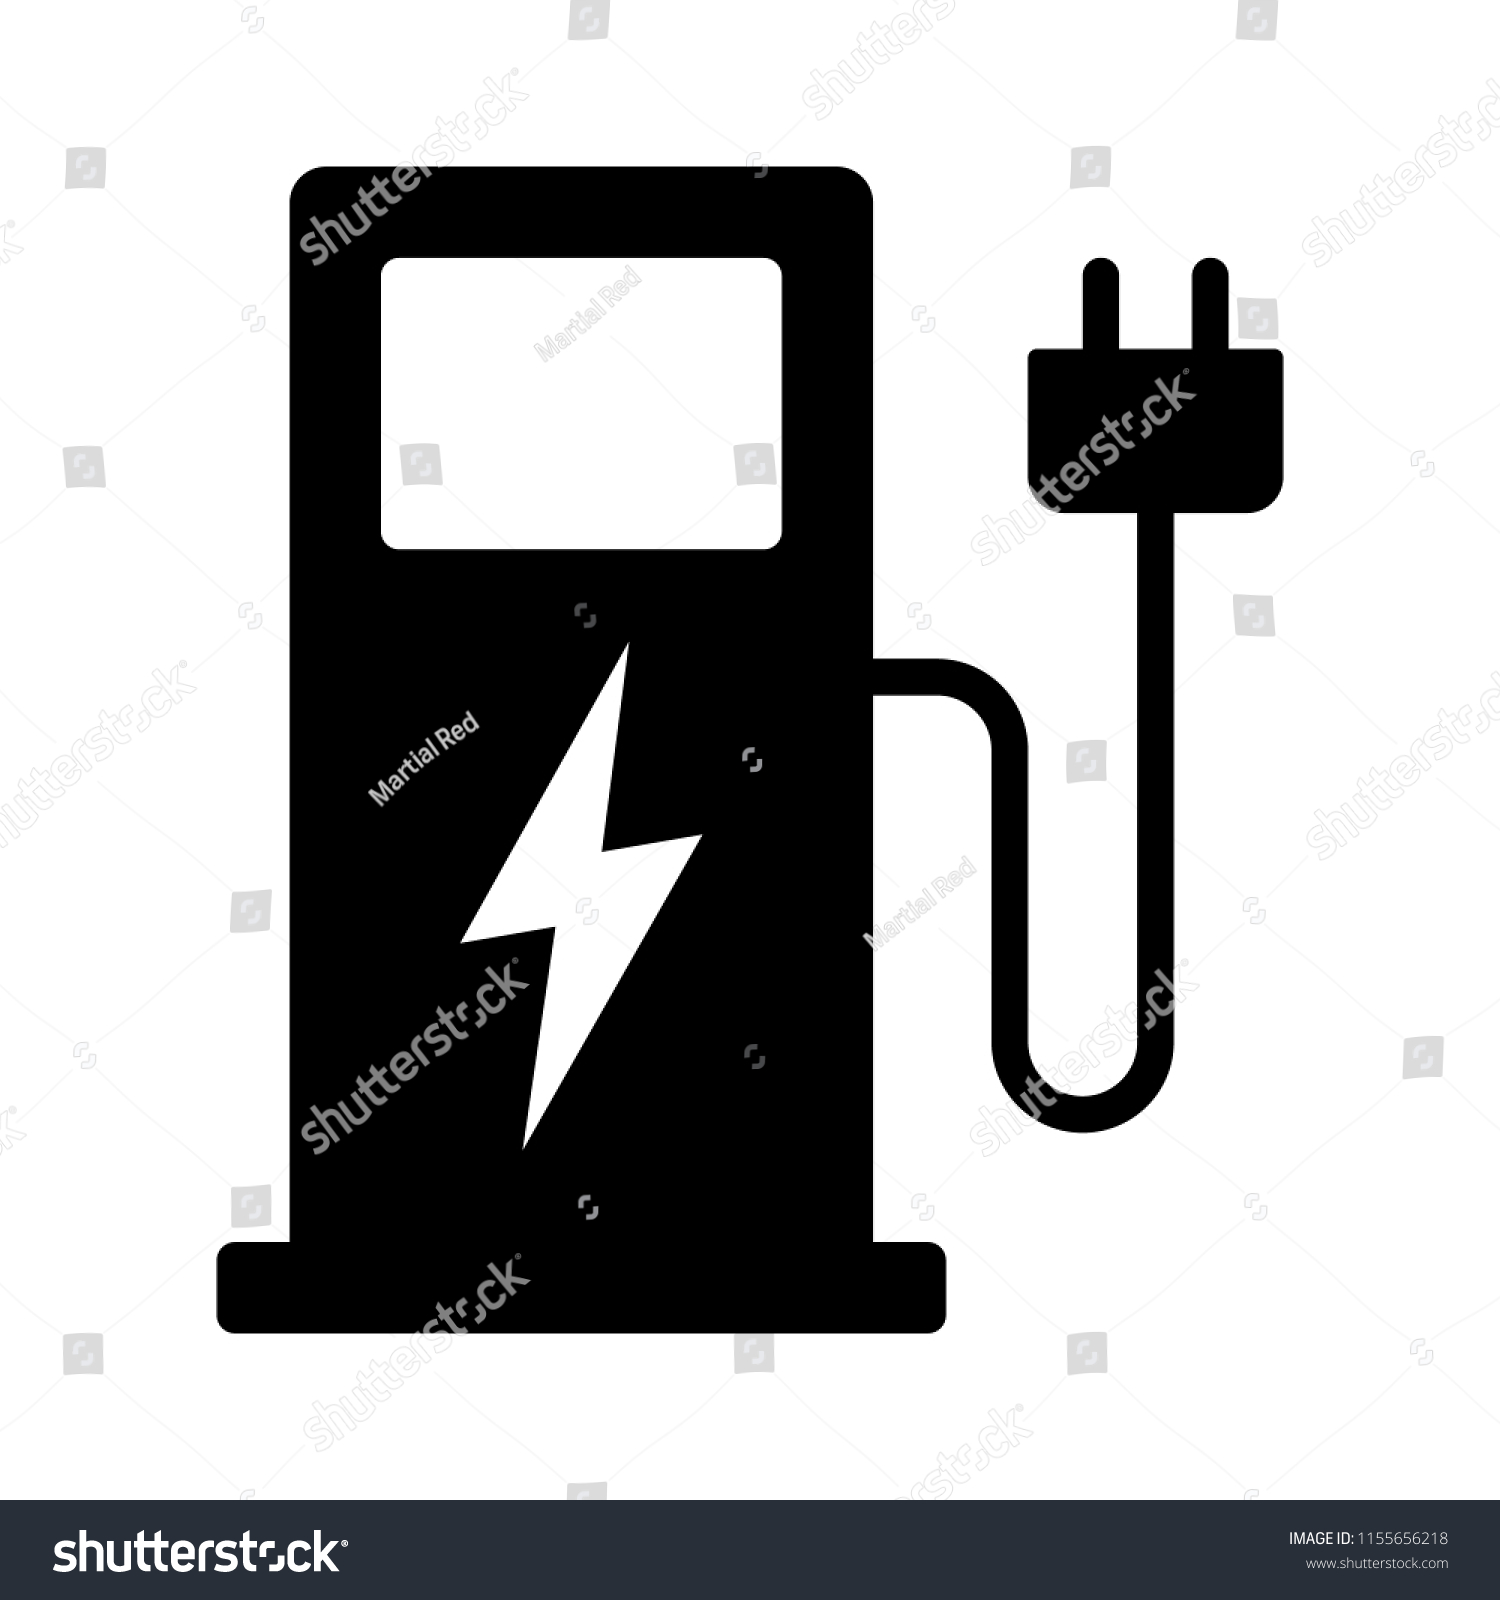 SVG of Electric vehicle charging station or EV charge point for electric vehicles / cars flat vector icon for apps and websites svg